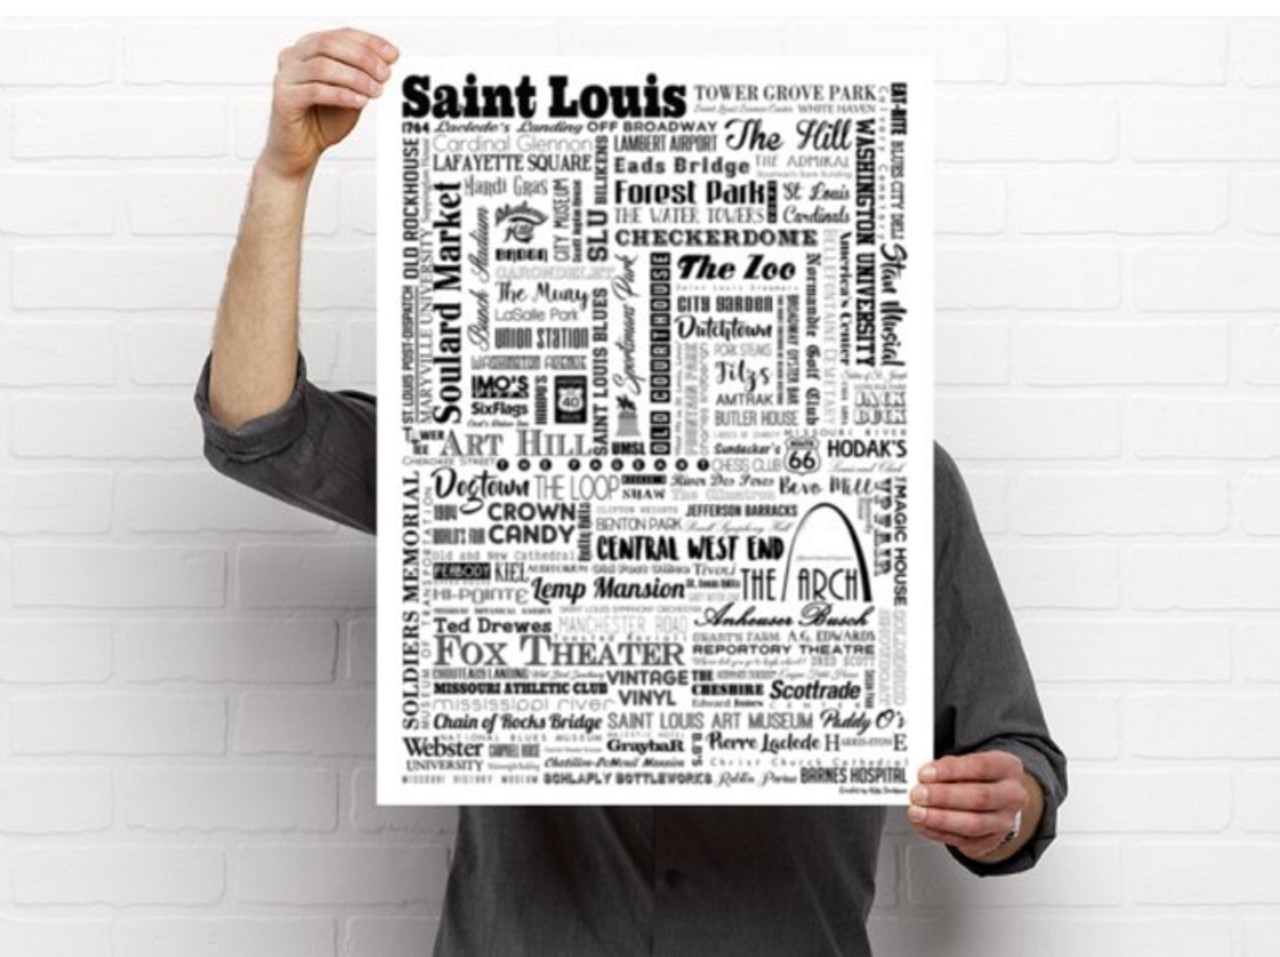 St. Louis Print
If you know someone who loves St. Louis -- no, really loves it -- get them this gift that captures (almost) all the things that make it awesome. This 18x24 print turns the names of favorite local businesses, parks and haunts into one big work of art. Photo courtesy of Kelly Sieckhaus Designs.